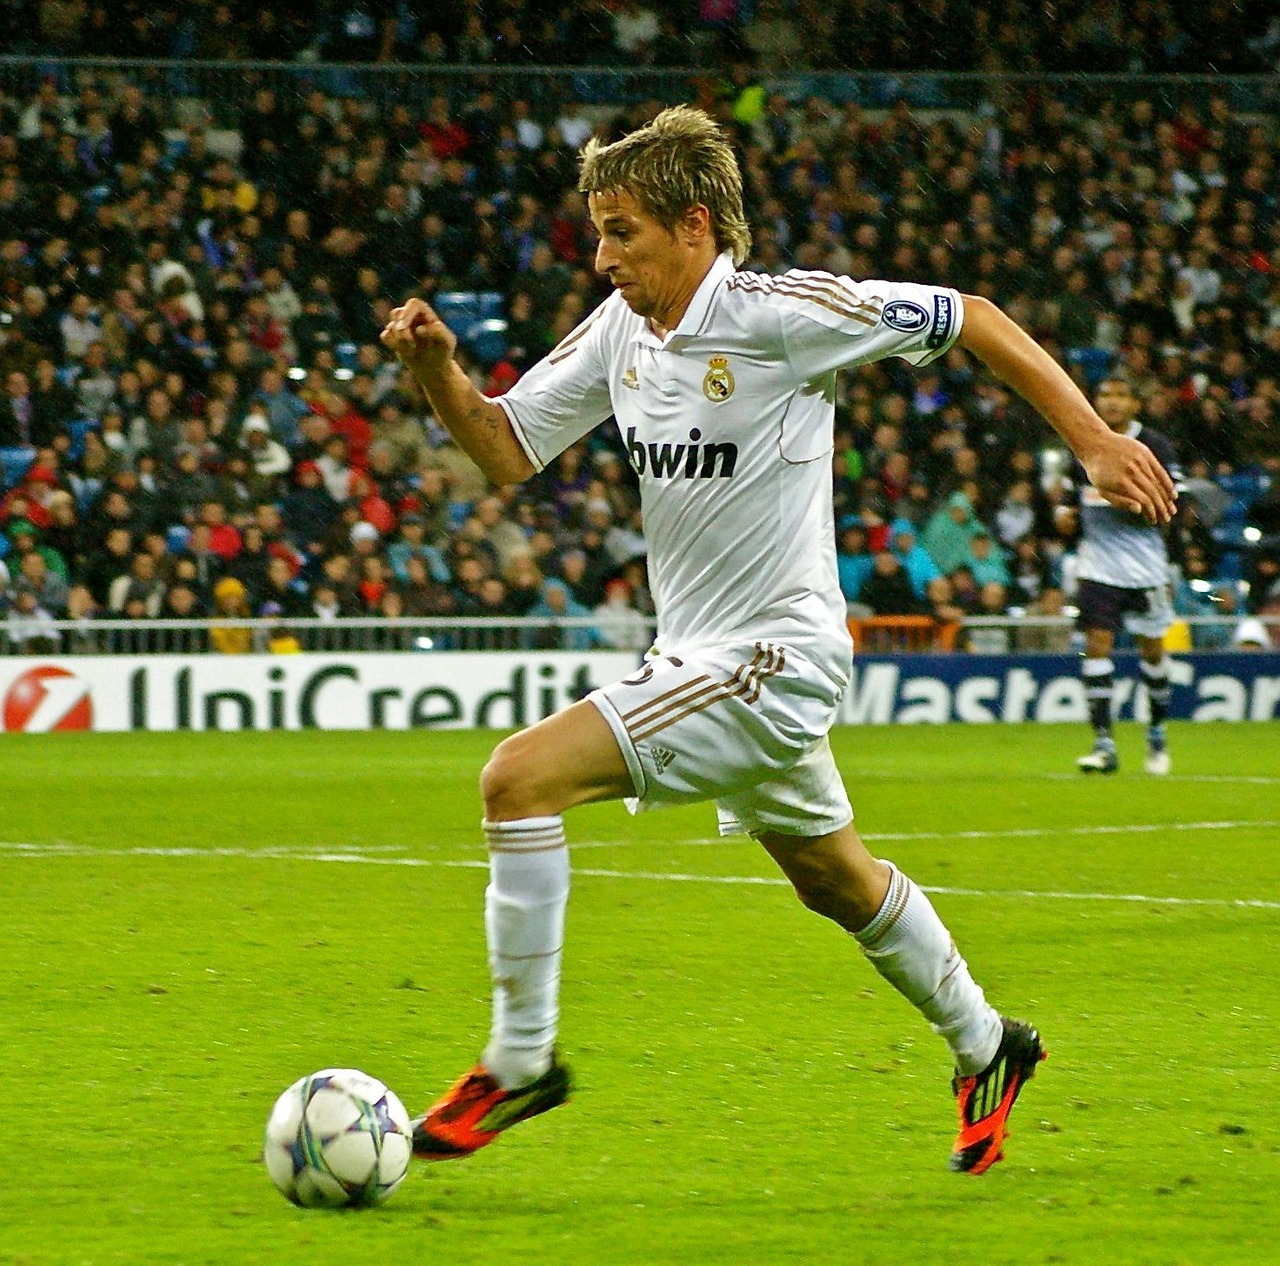 fabio coentrao,player,athlete,soccer,football,game,sports,competition,ball,field,grass,spectators,stadium,real madrid,free pictures, free photos, free images, royalty free, free illustrations, public domain